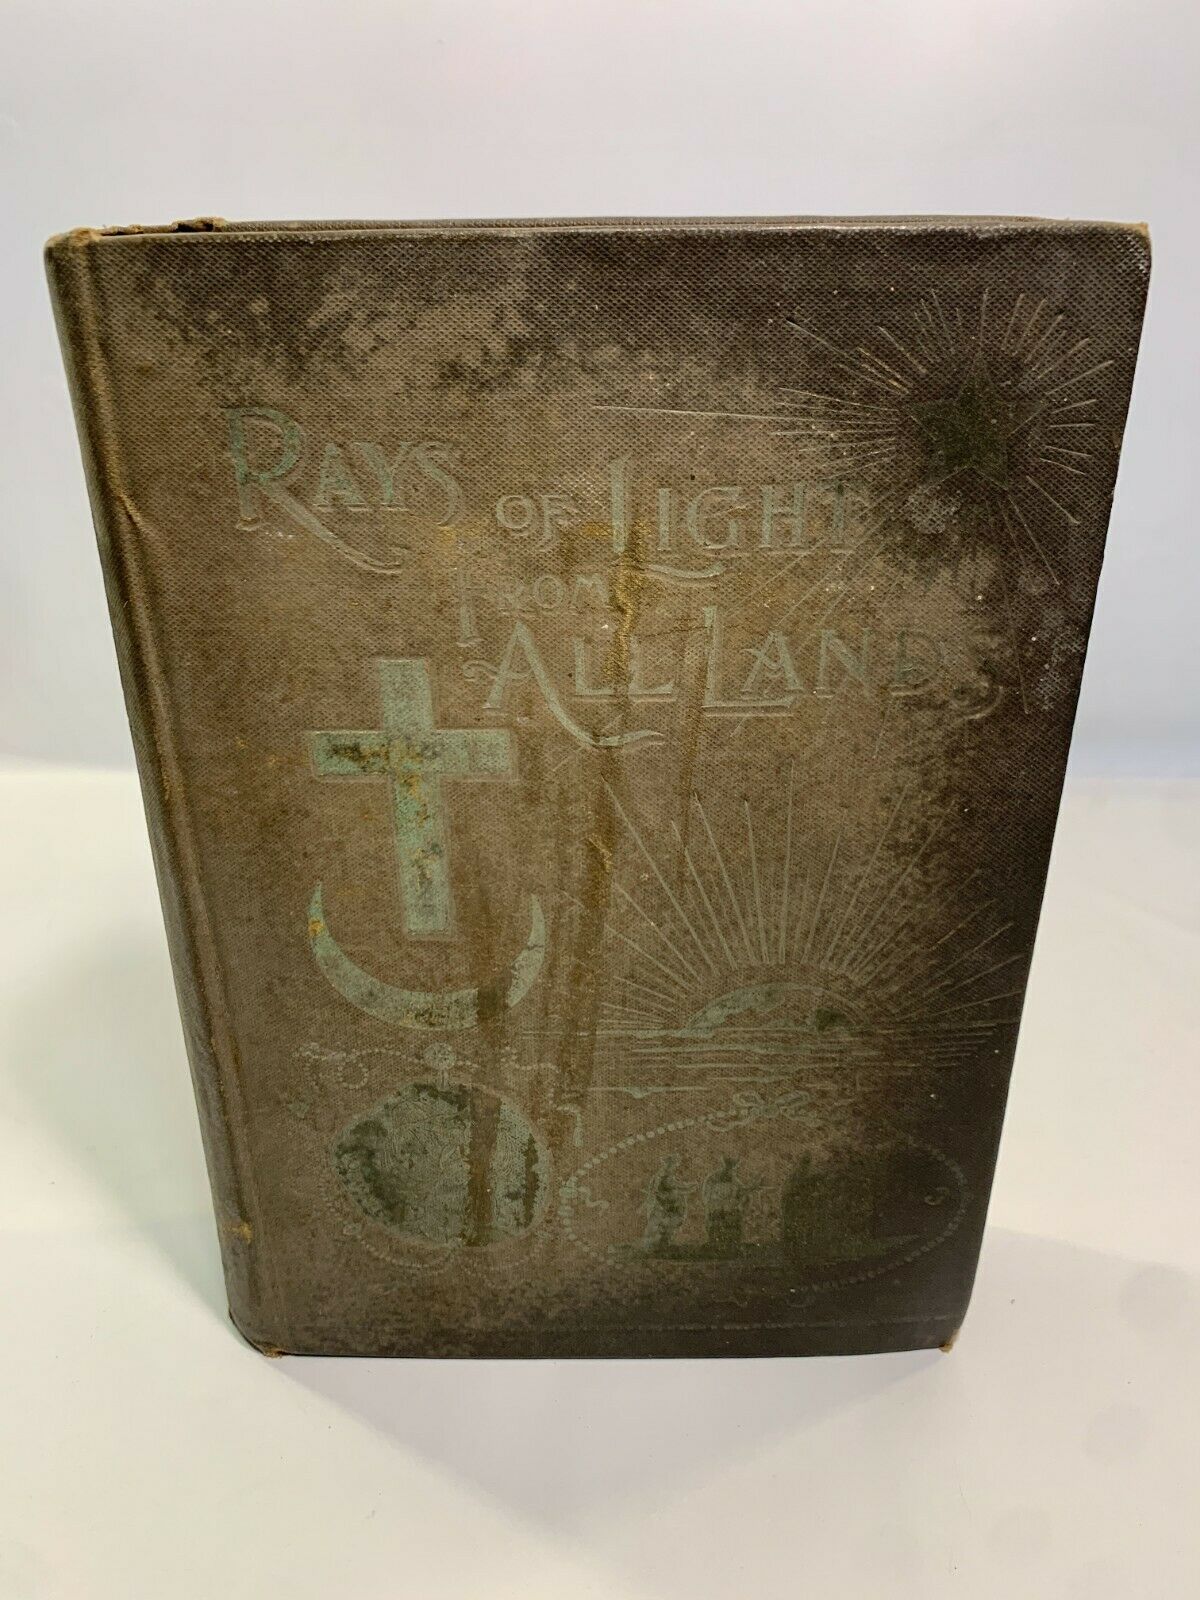 Rays of Light From All the Land: The Bibles and Beliefs of Mankind 1895